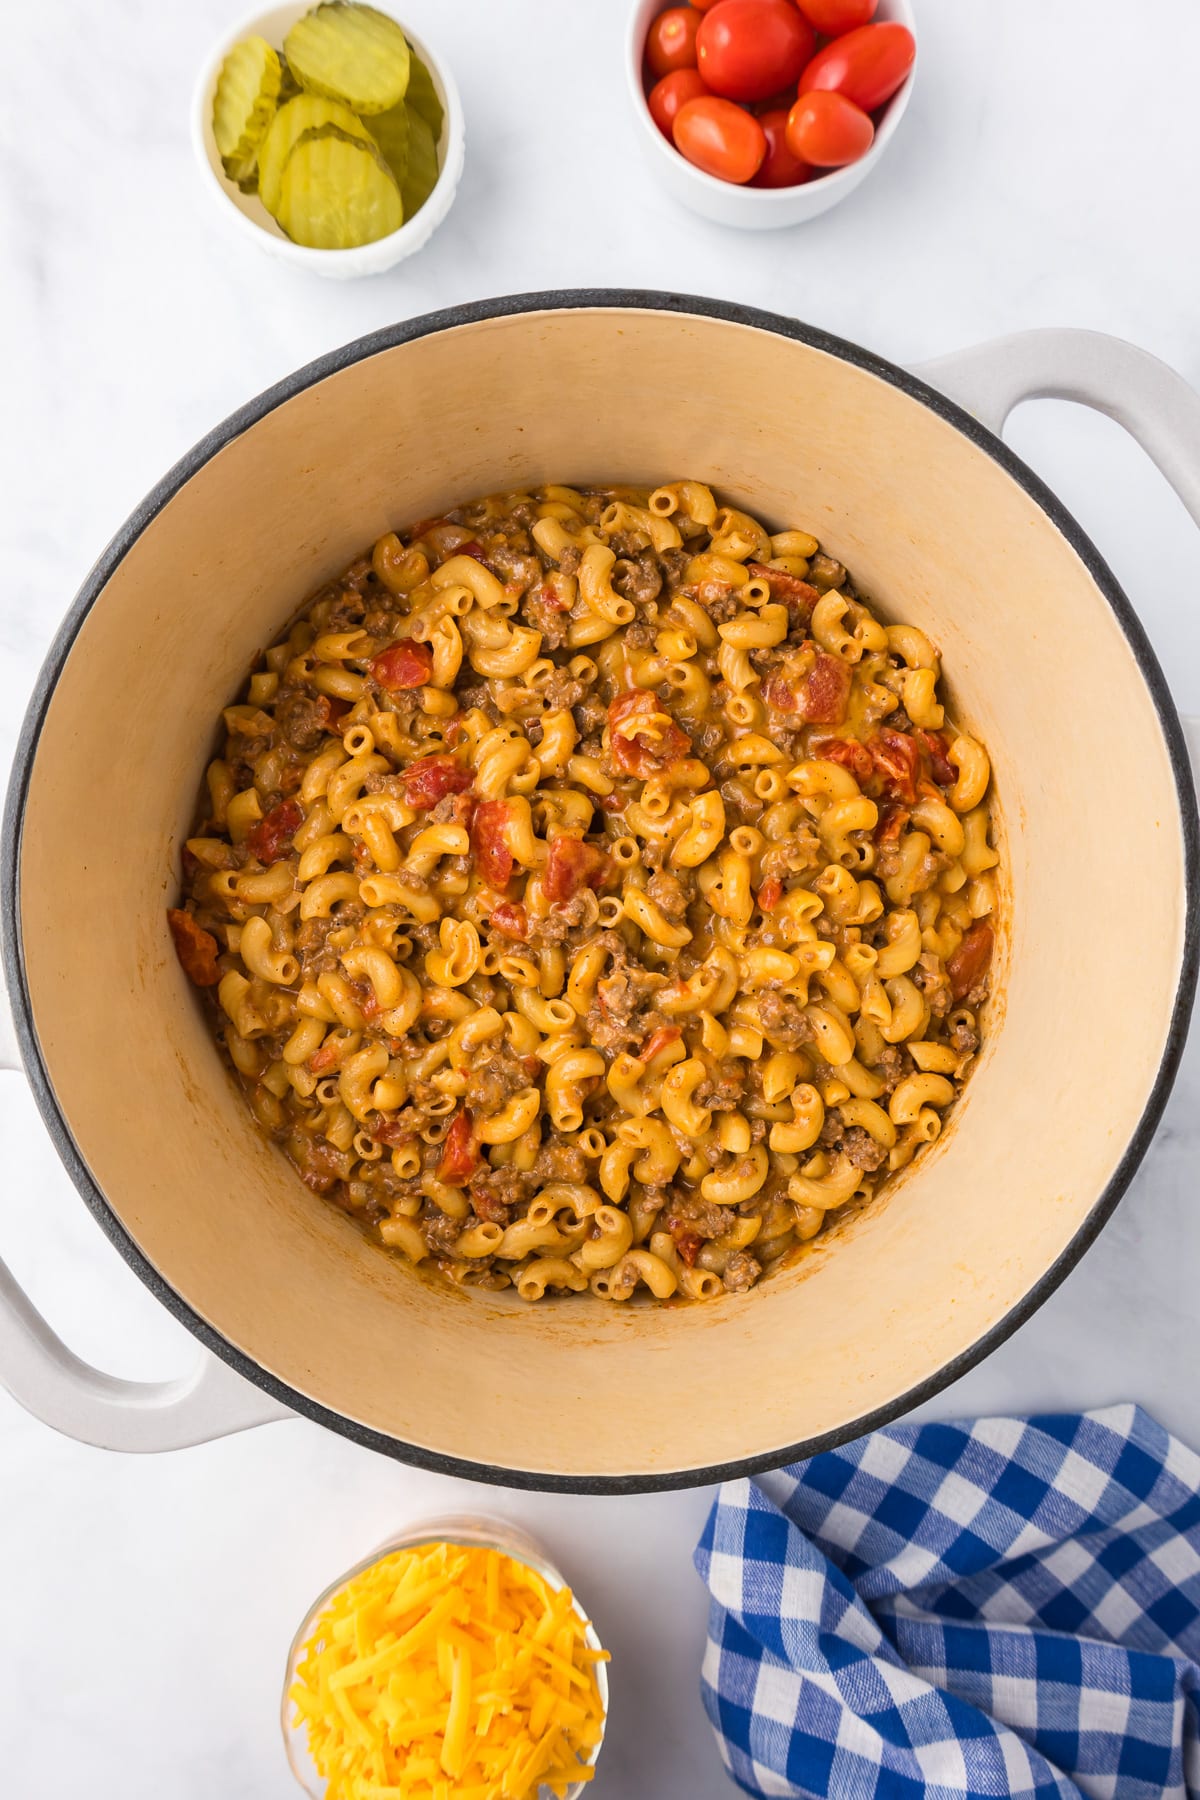 Cooked macaroni mixed with tomatoes and ground beef in a large pot from overhead with cheese, pickled and tomatoes in small bowls nearby.